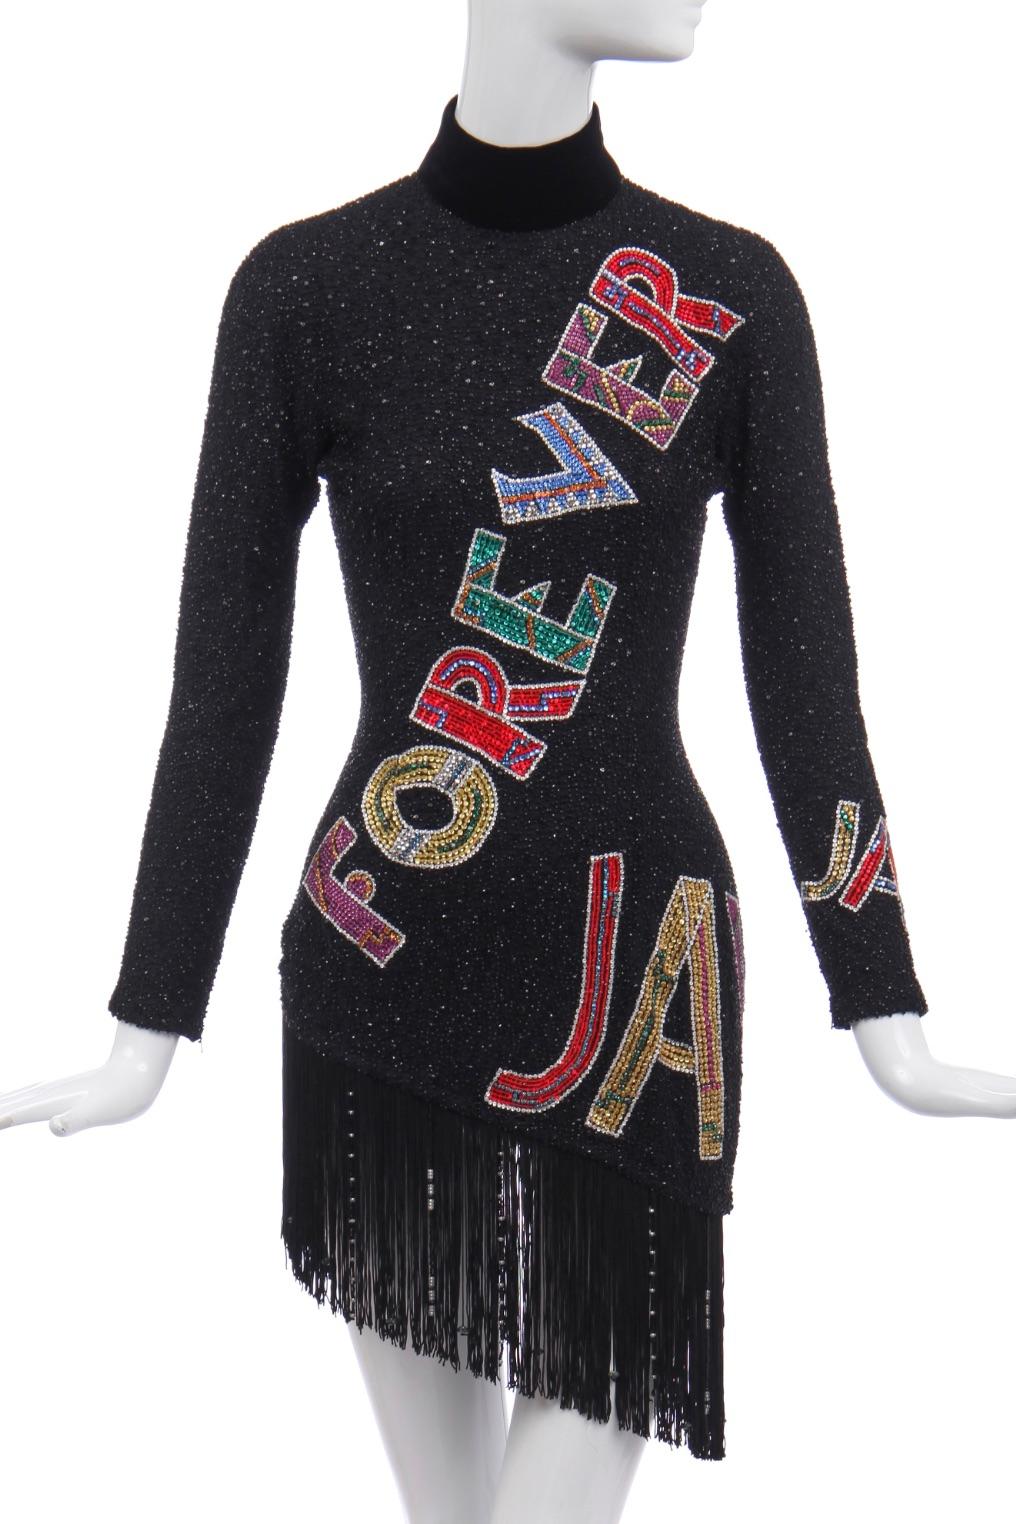 Atelier labelled, the ground covered entirely with cut beads, the words worked in dazzling rhinestones and colourful beads, asymmetric, fringed hem.

This dress is based on an original design by Gianni Versace of a stage costume for Zizi Jeanmaire